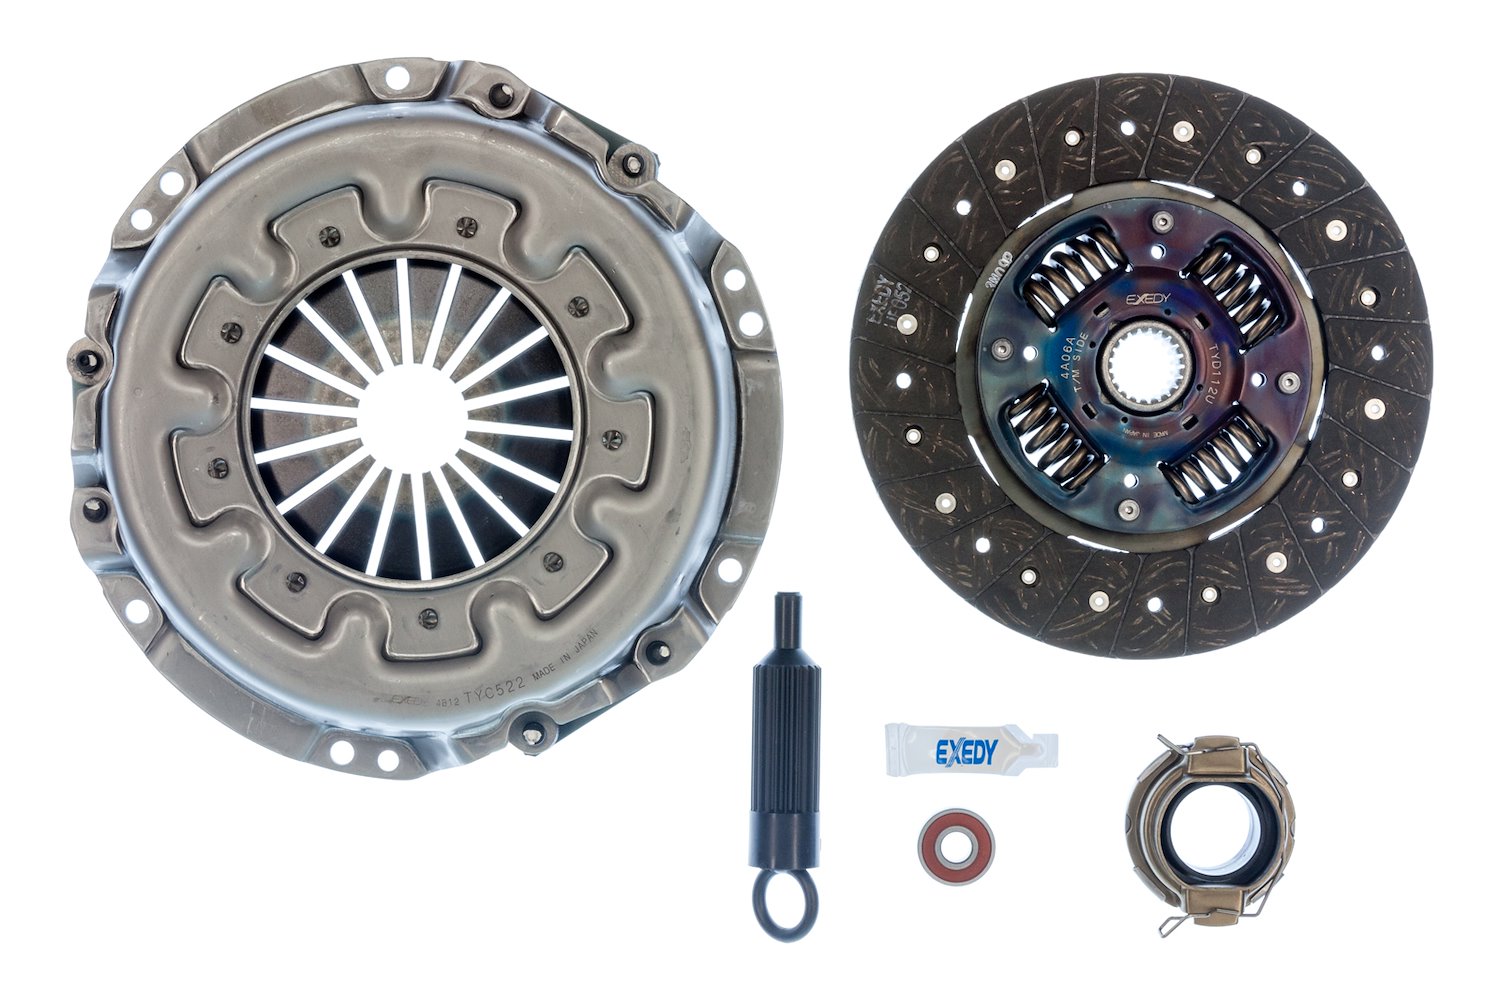 KTY13 OEM Replacement Transmission Clutch Kit, 1991-1993 Toyota Previa L4